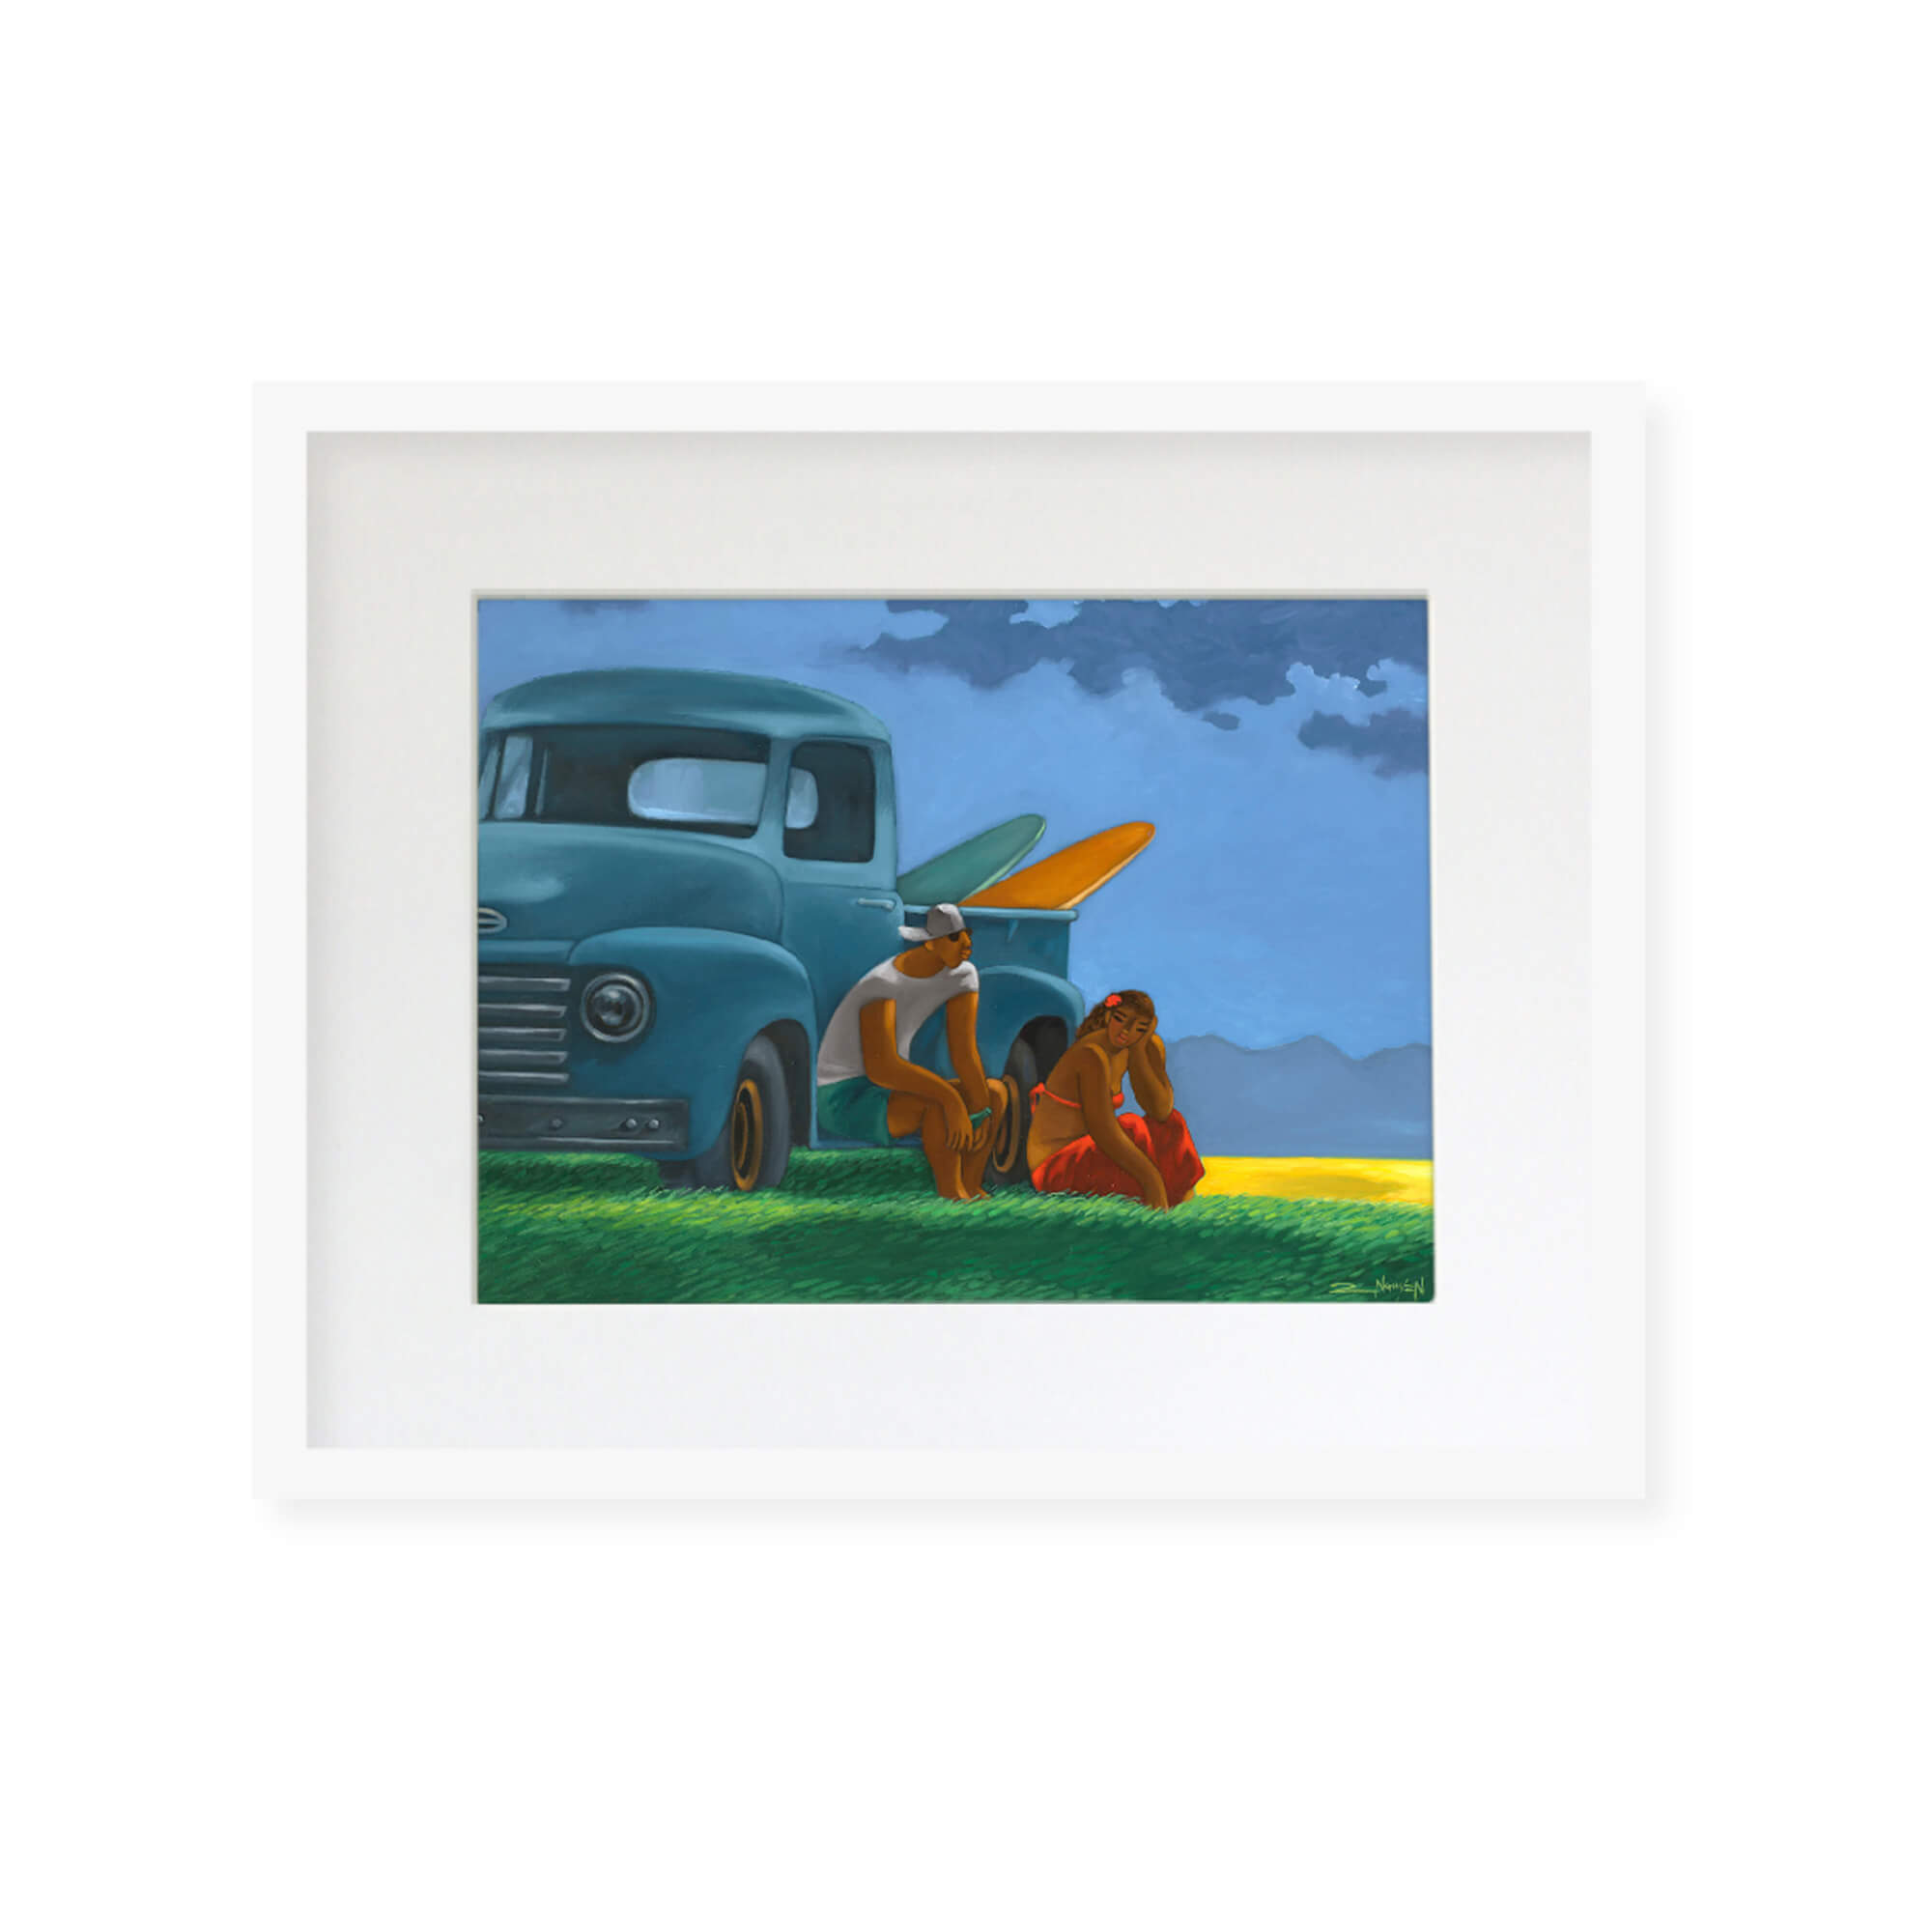 Framed matted art print of a couple sitting on the green field by their vintage truck by Hawaii artist Tim Nguyen